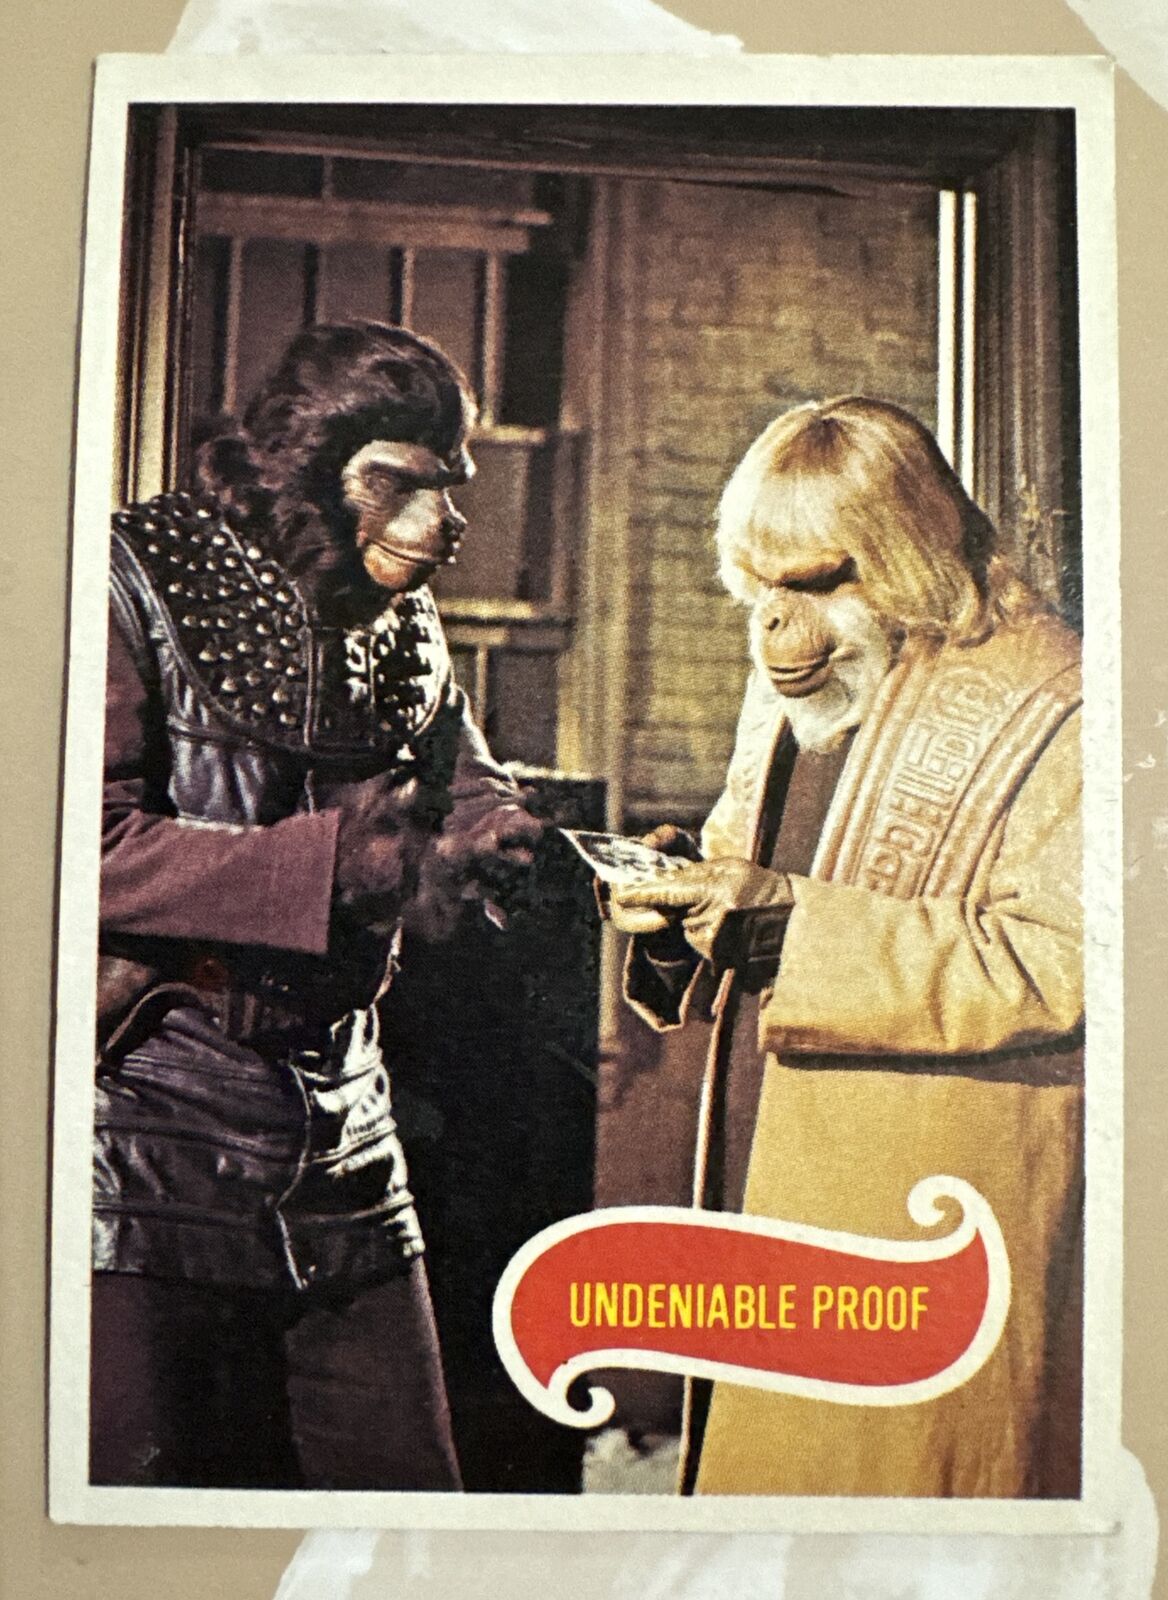 1975 Topps Planet of the Apes #13 Card. Near Mint Condition.